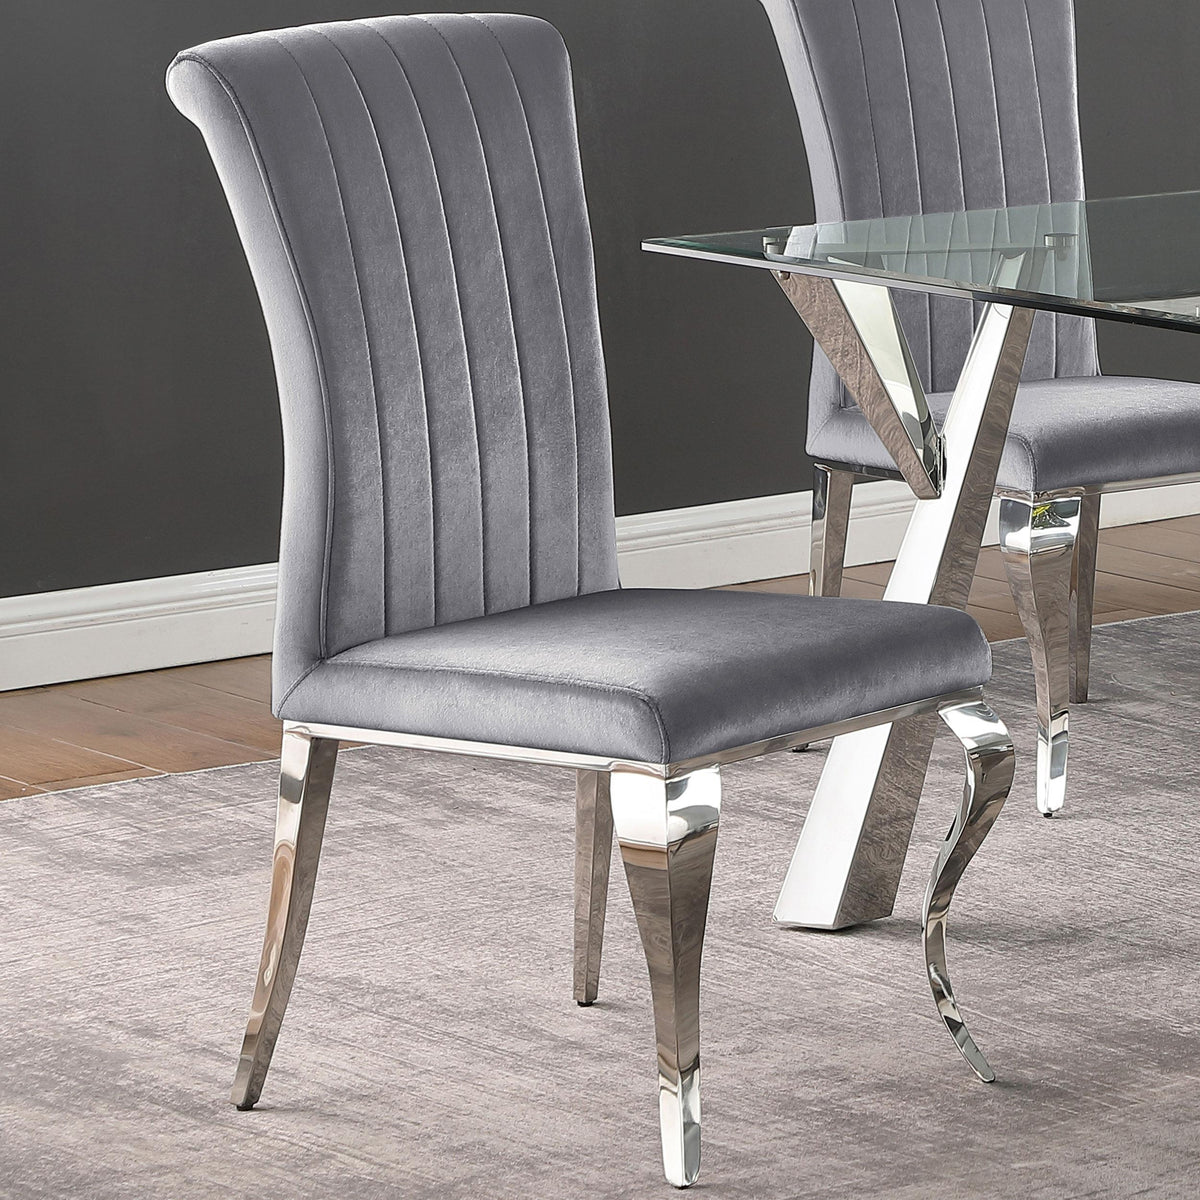 Betty Upholstered Side Chairs Grey and Chrome (Set of 4) Betty Upholstered Side Chairs Grey and Chrome (Set of 4) Half Price Furniture